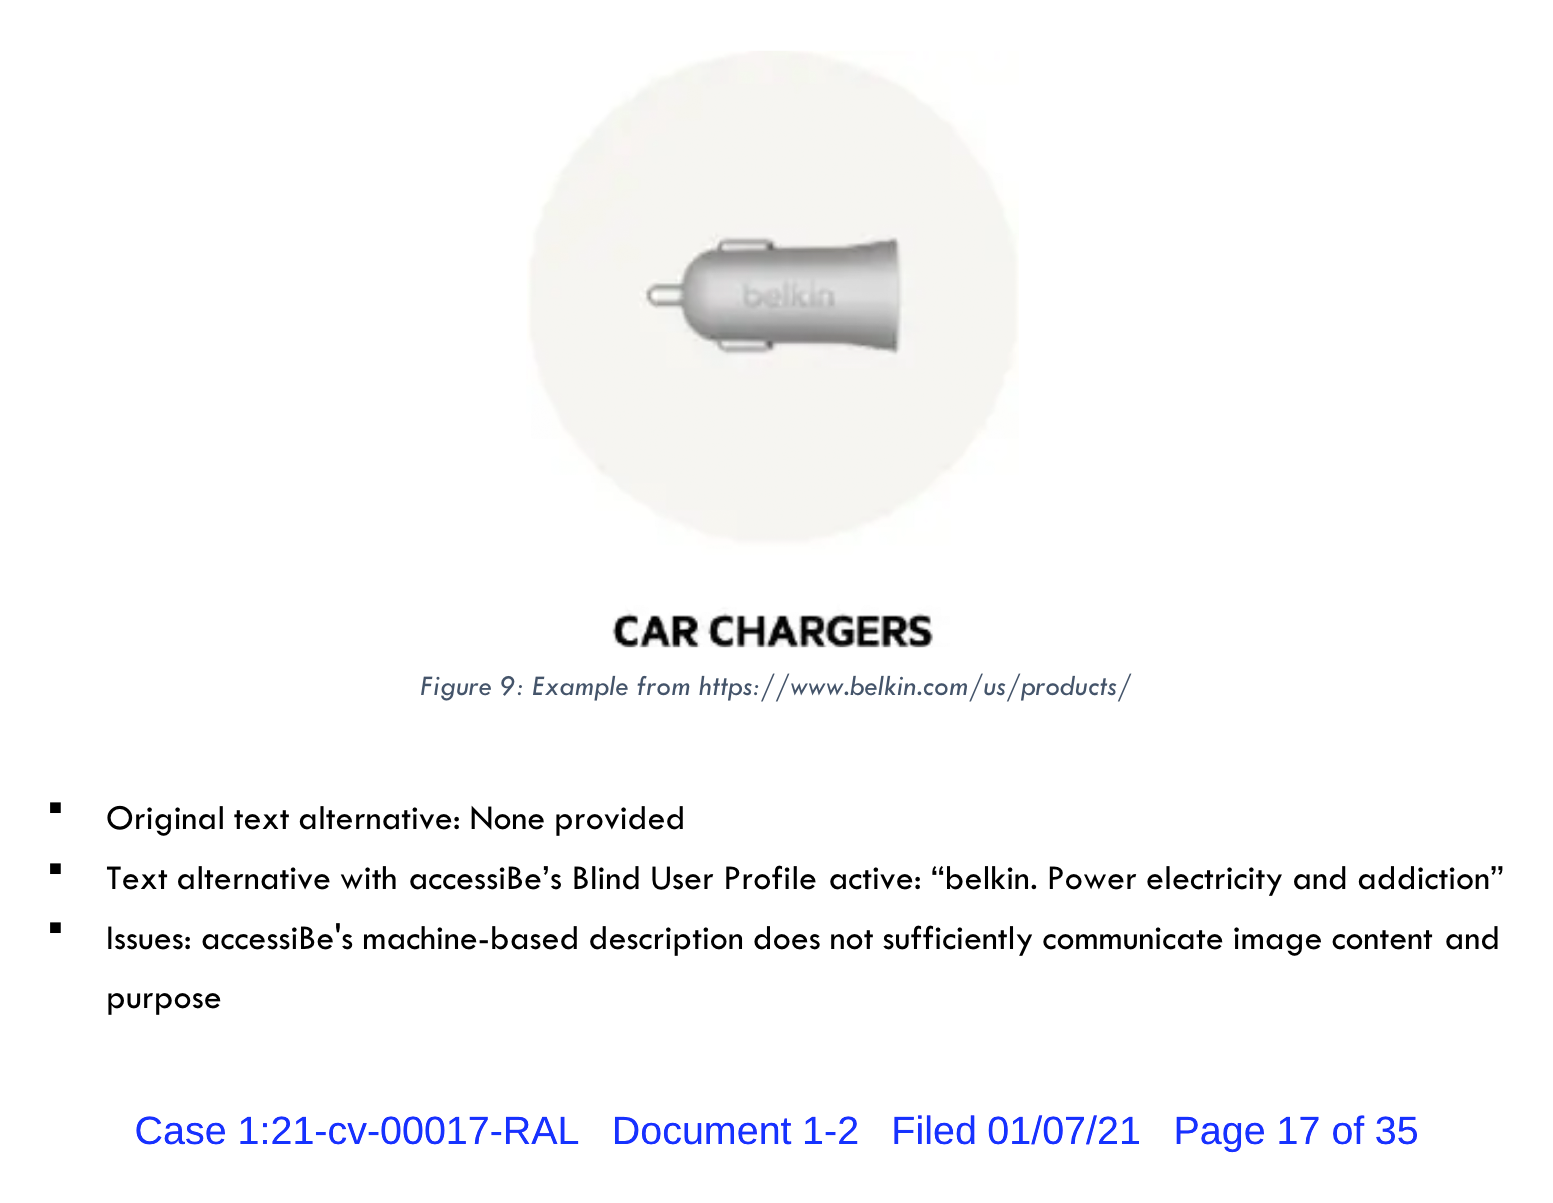 A photo of a Belkin car charger. Below is is text that reads: Car Chargers. Figure 9: Example from https://www.belkin.com/us/products/. Bulleted list that reads, 'Original text alterative: None provided. Text alternative with accessiBe's Blind User Profile active: belkin. Power electricity and addiction. Issues: accessiBe's machine-based description does not sufficiently communicate image content and purpose.' Case 1:21-cv-00017-RAL. Document 1-2. Filed 01/07/21. Page 17 of 35. Screenshot.